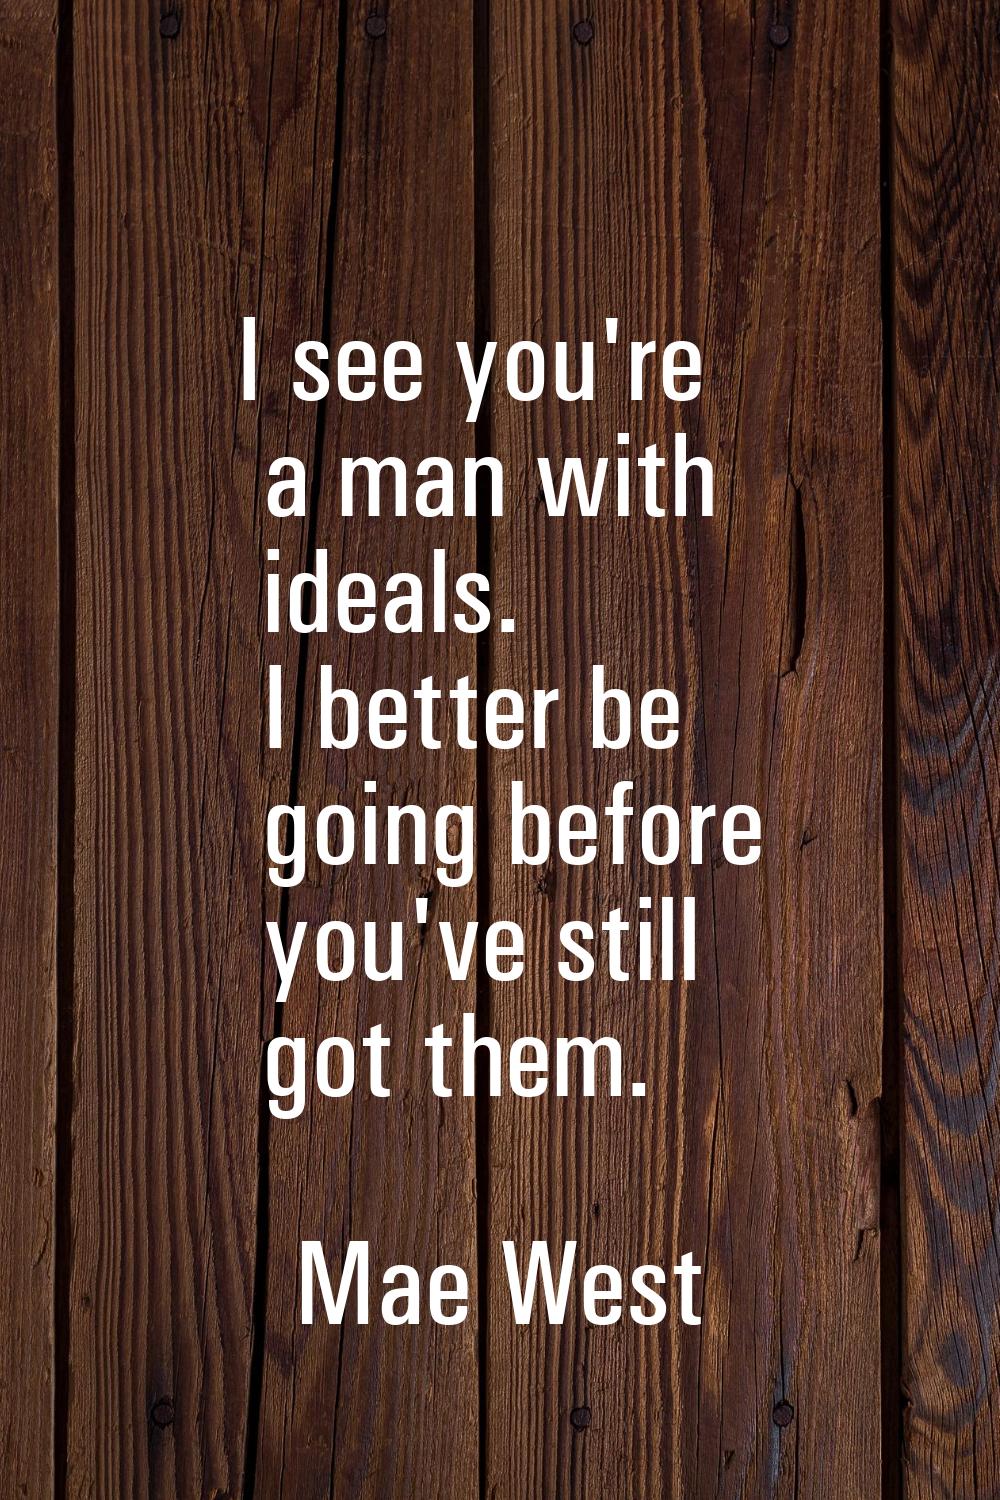 I see you're a man with ideals. I better be going before you've still got them.